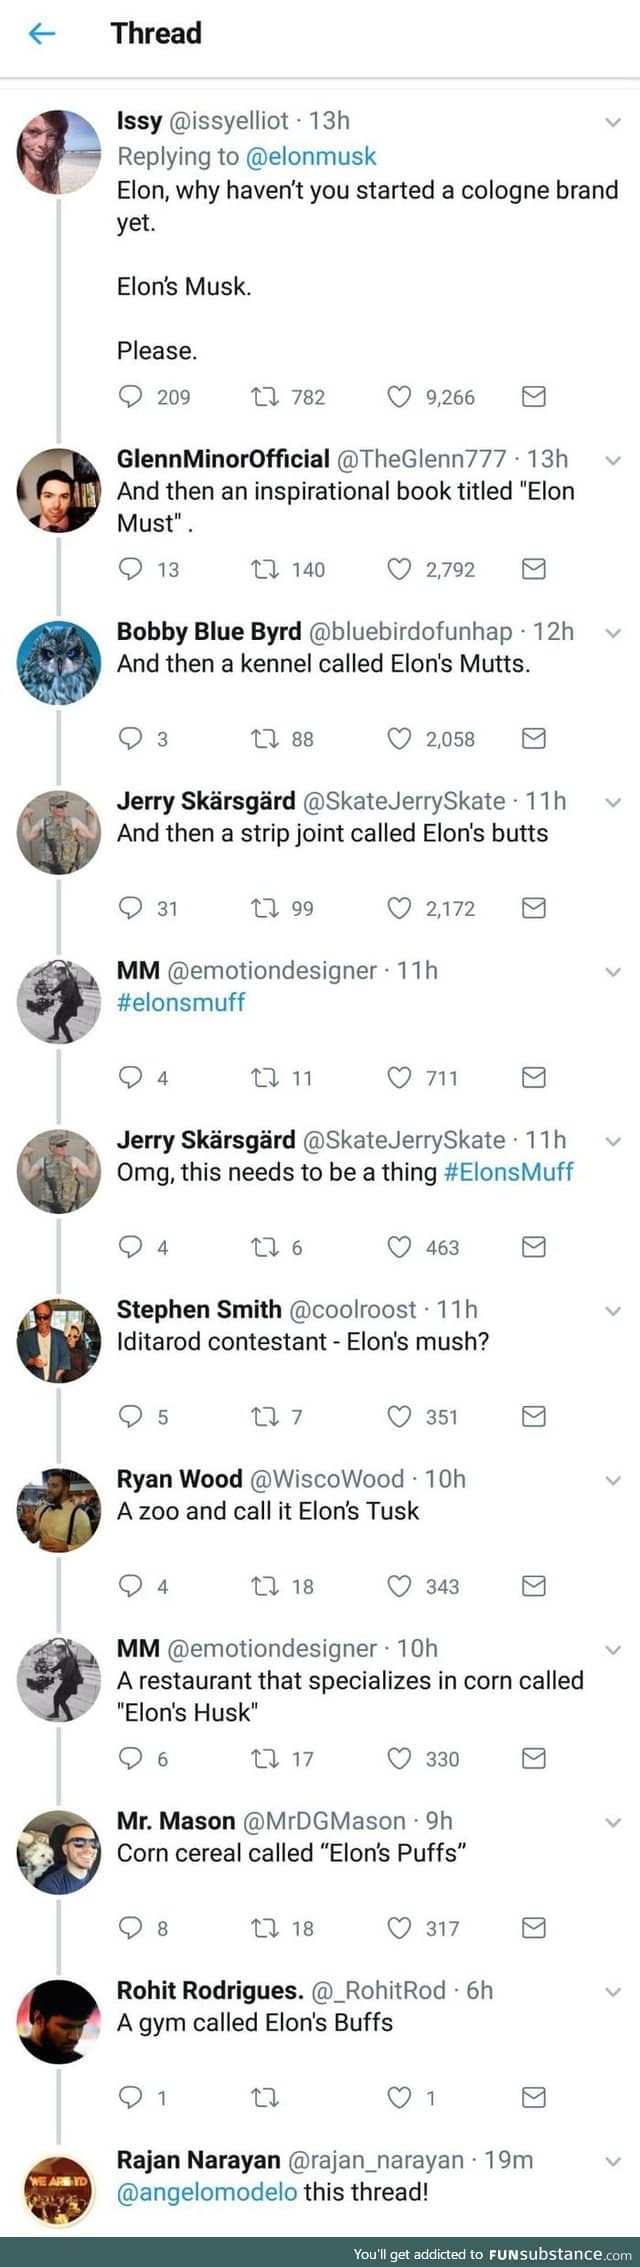 One of the best threads on twitter